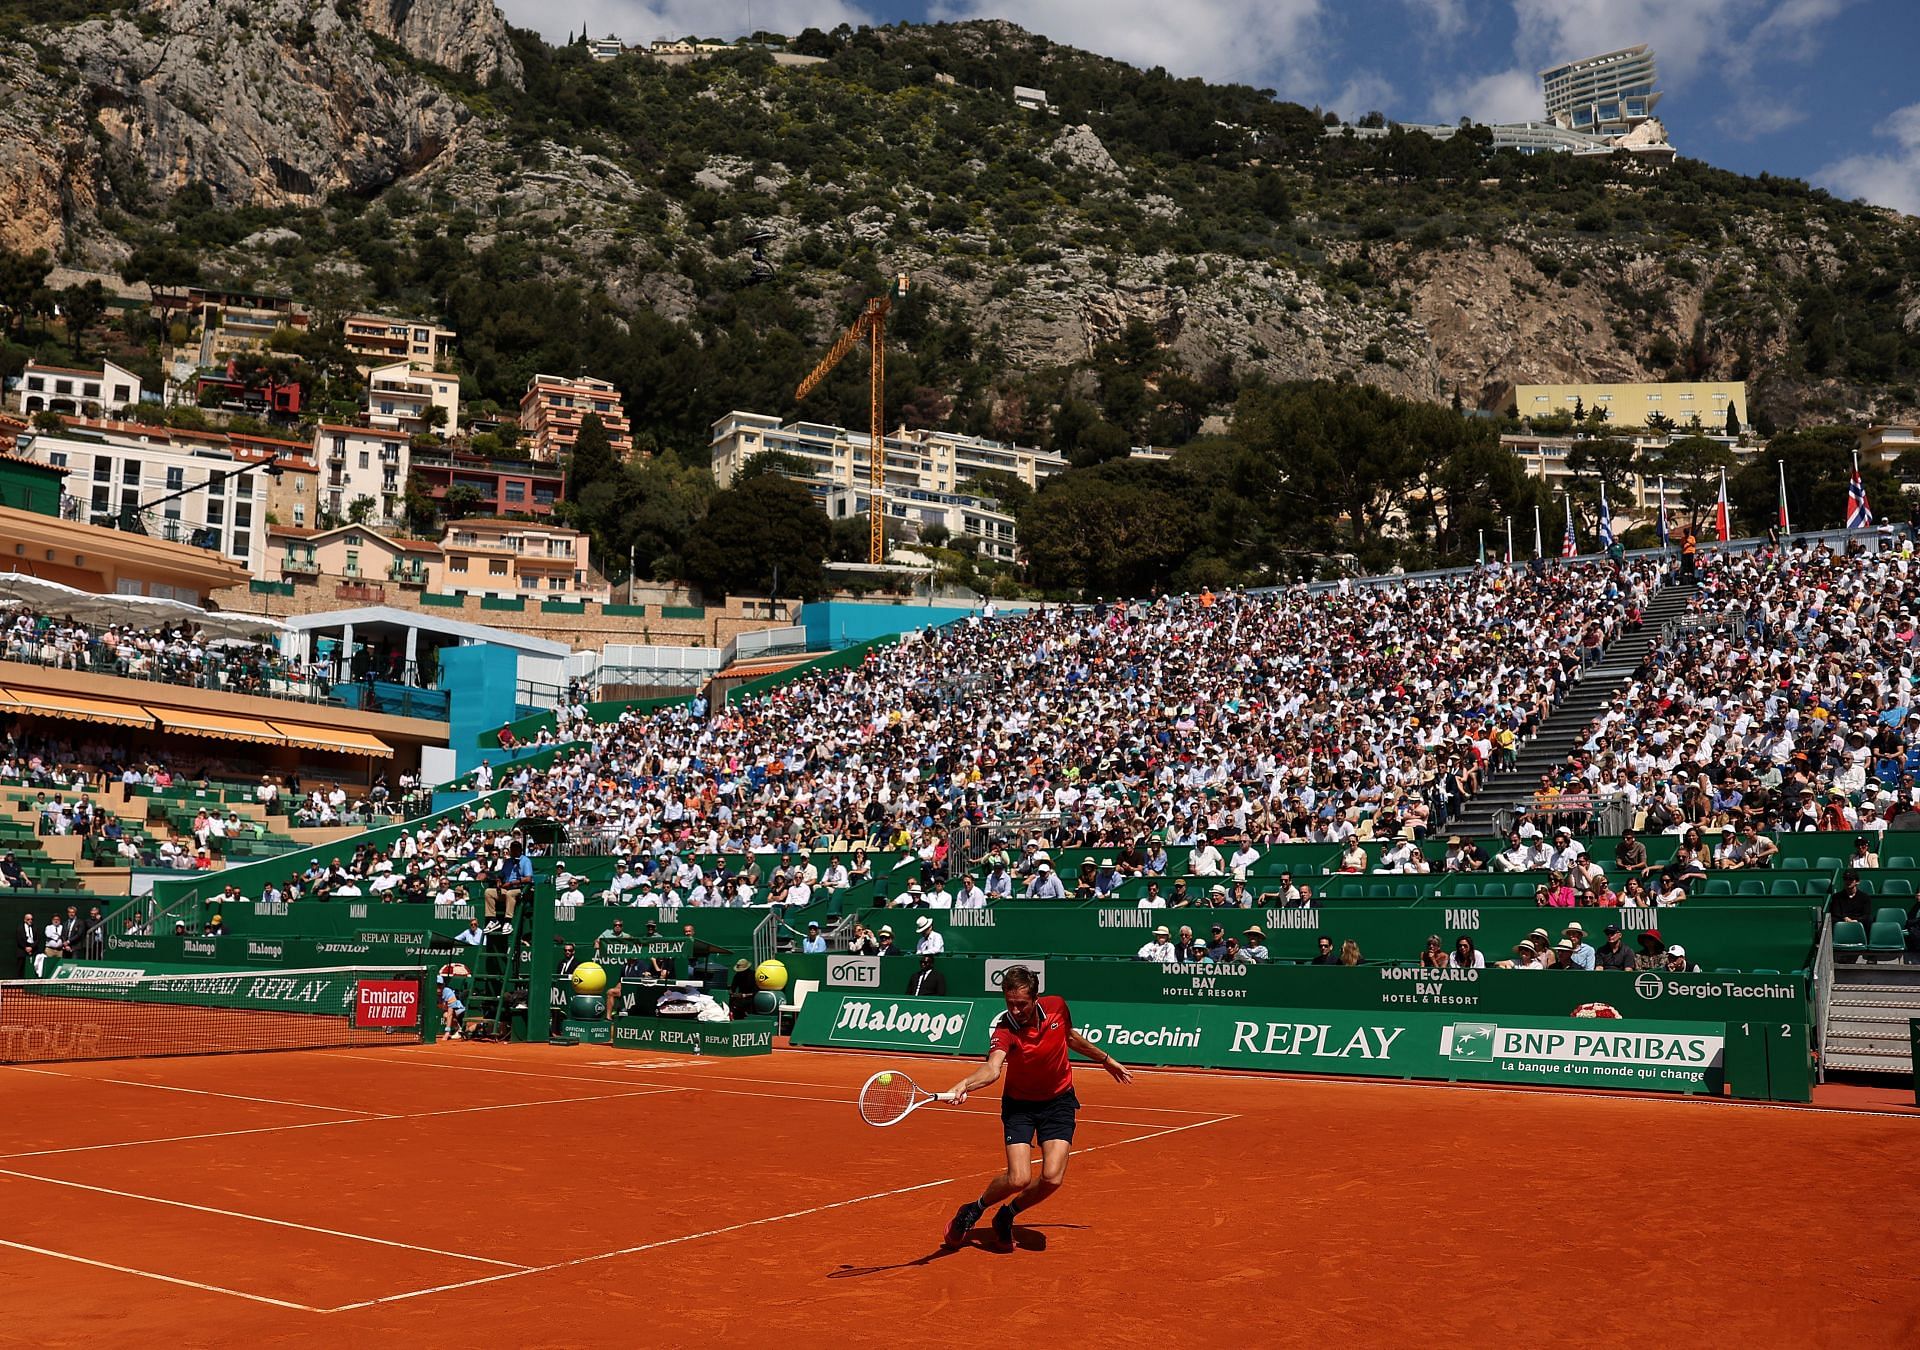 Medvedev at the Rolex Monte-Carlo Masters - Day Five